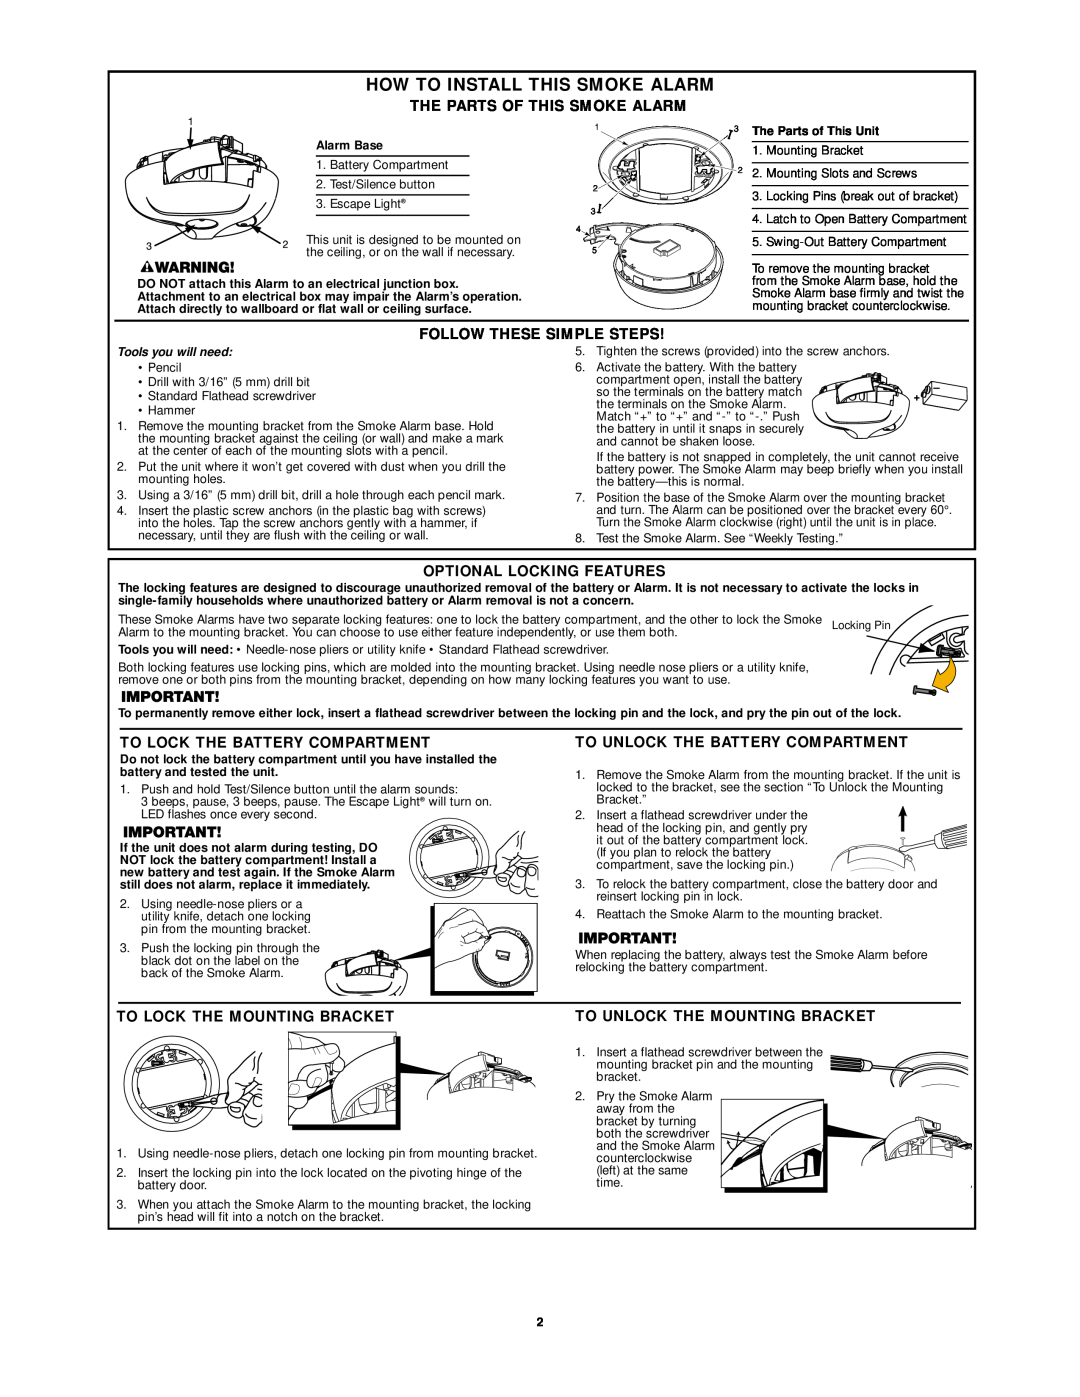 First Alert SA304 user manual How To Install This Smoke Alarm, The Parts Of This Smoke Alarm, Follow These Simple Steps 